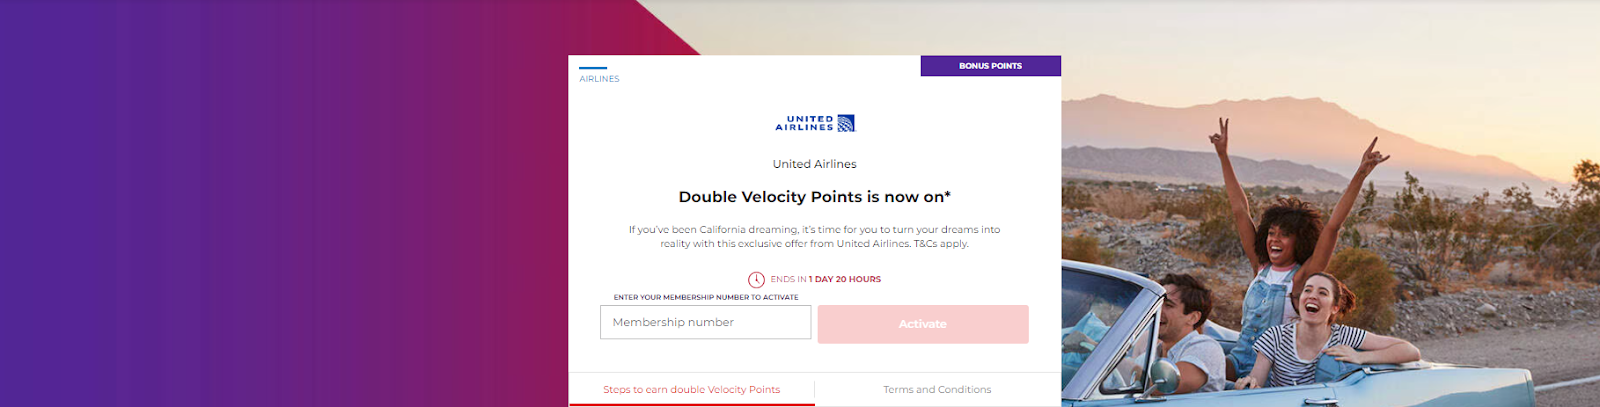 Double Velocity Points offer